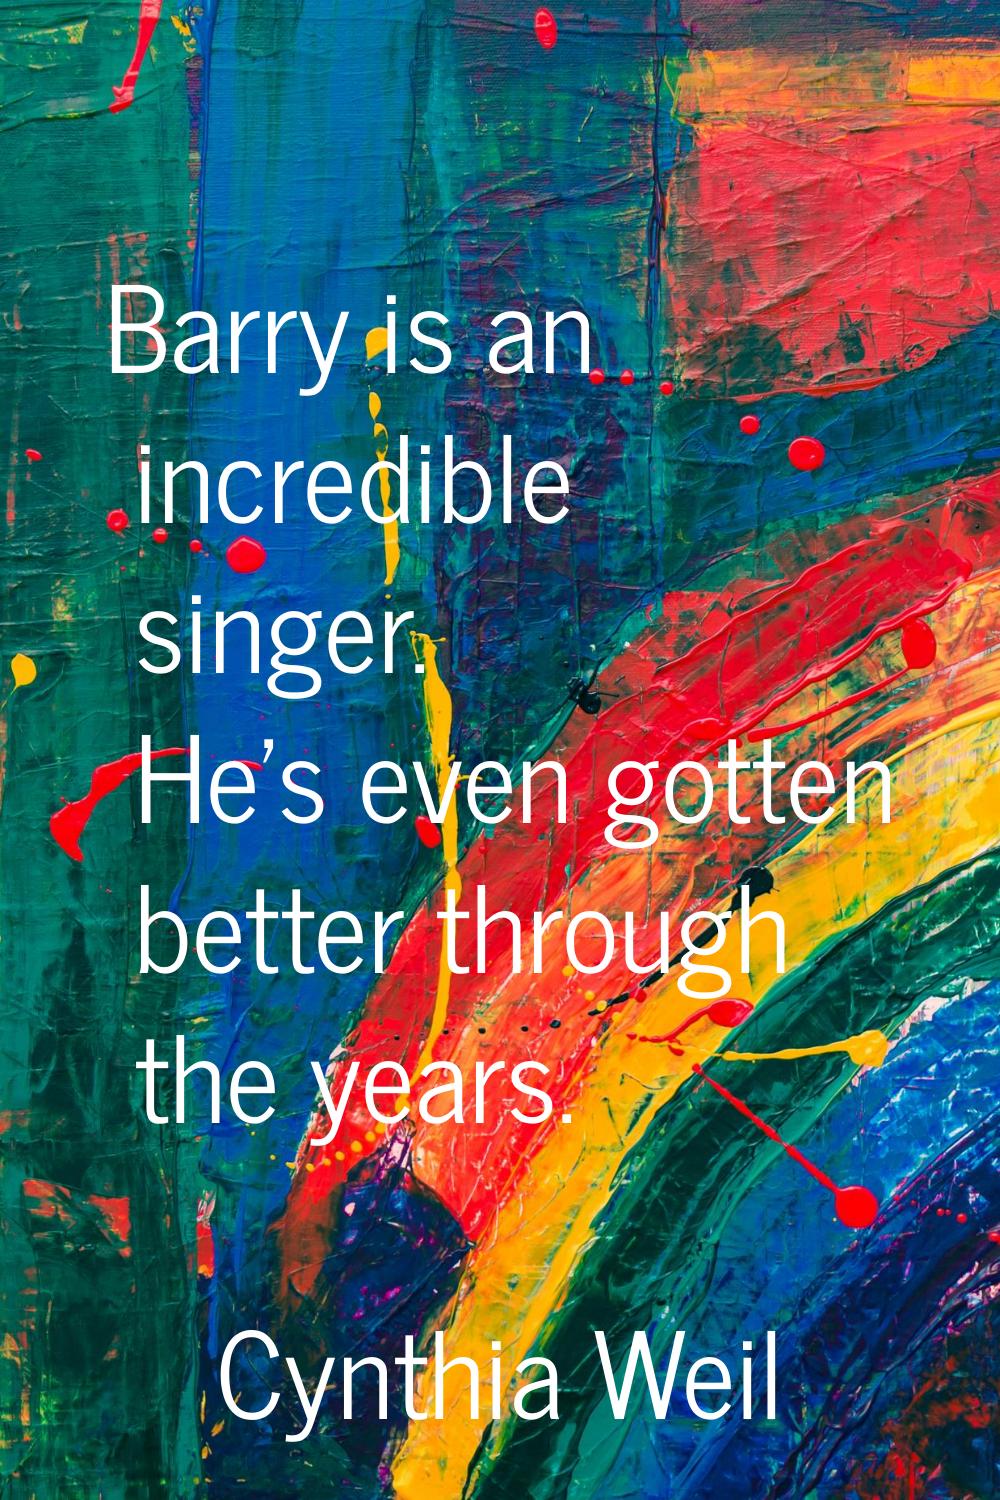 Barry is an incredible singer. He's even gotten better through the years.